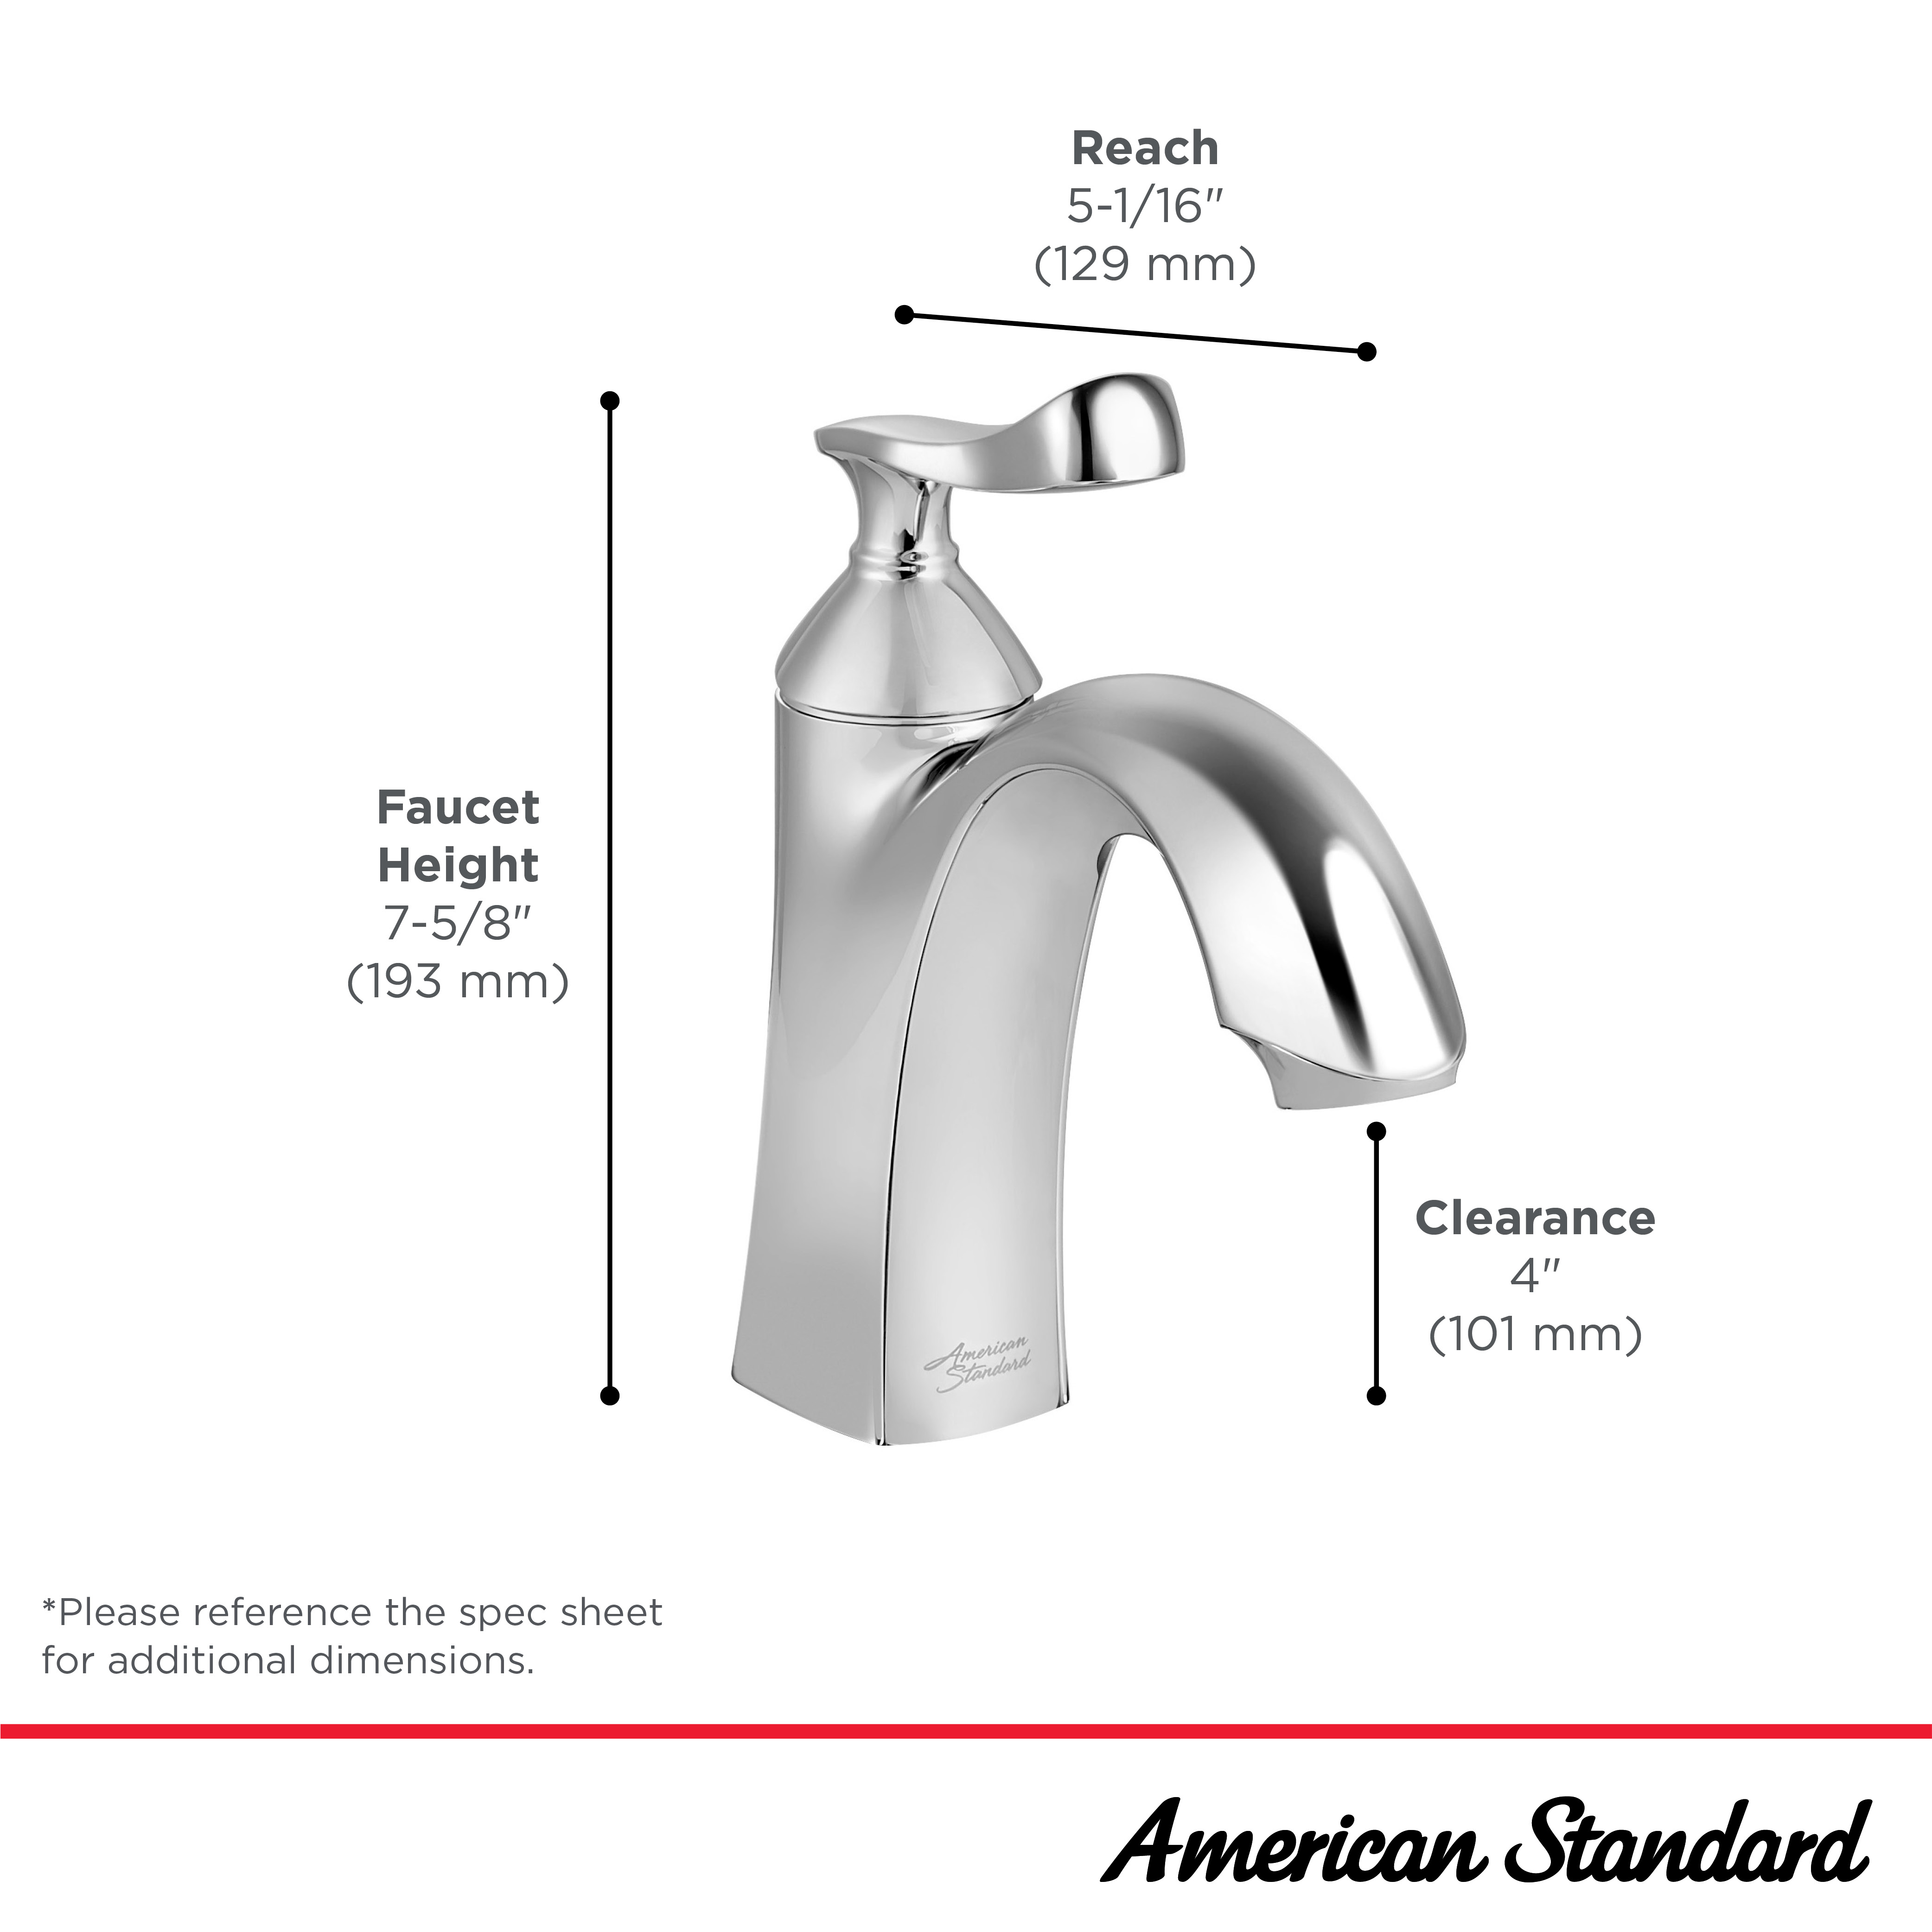 Chatfield® Single Hole Single-Handle  Bathroom Faucet 1.2 gpm/4.5 L/min With Lever Handle